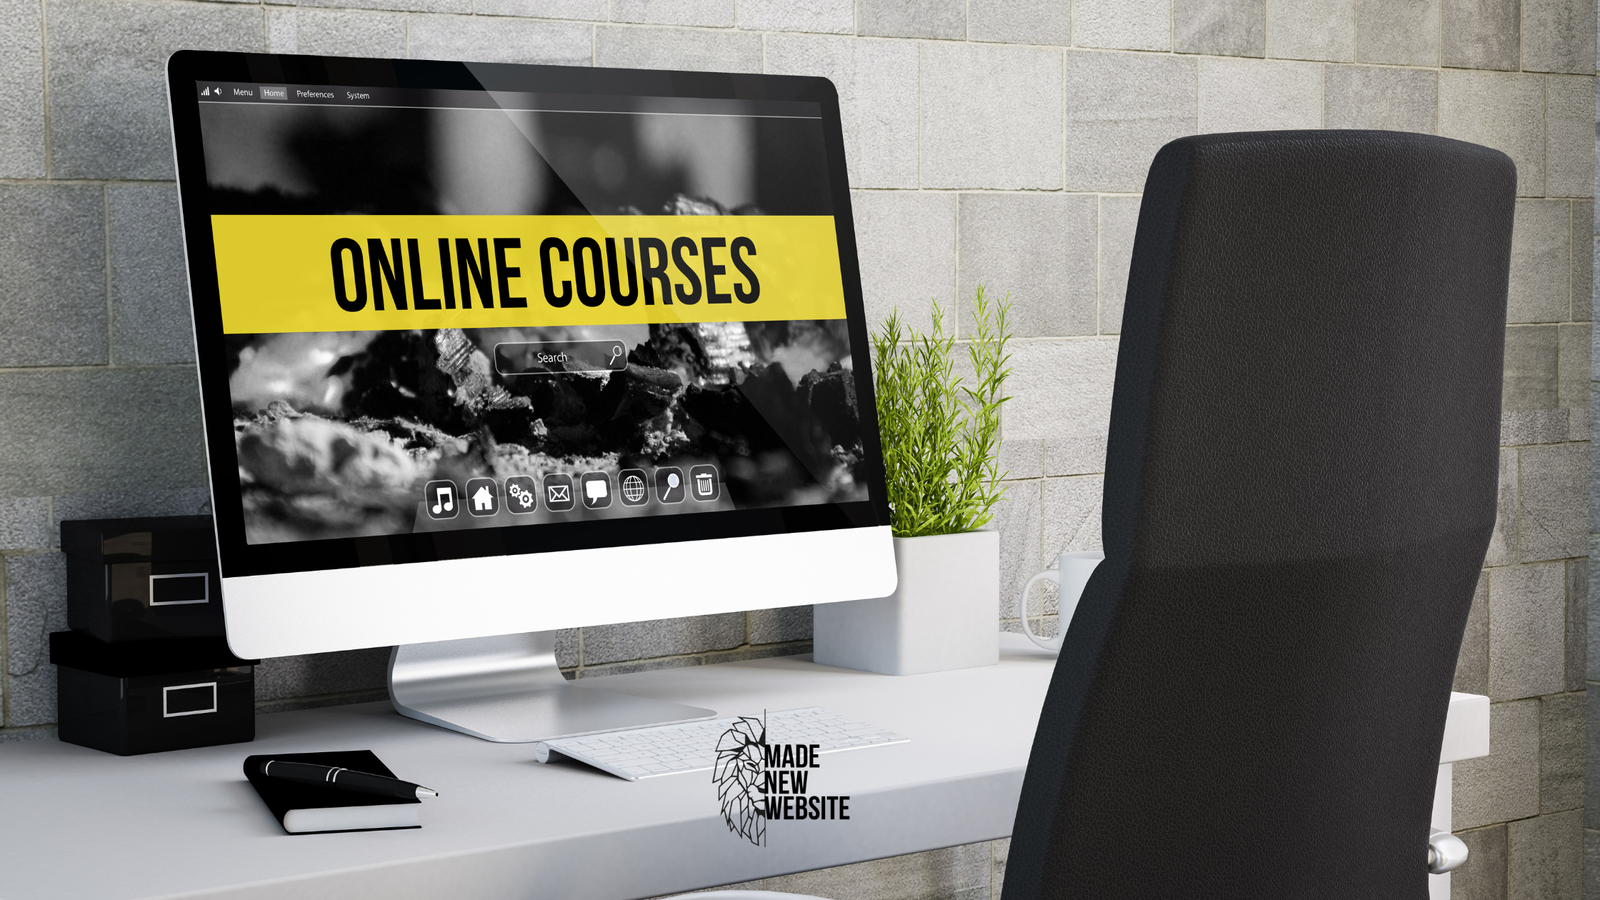 Online Learning Environment: Selling Courses Online